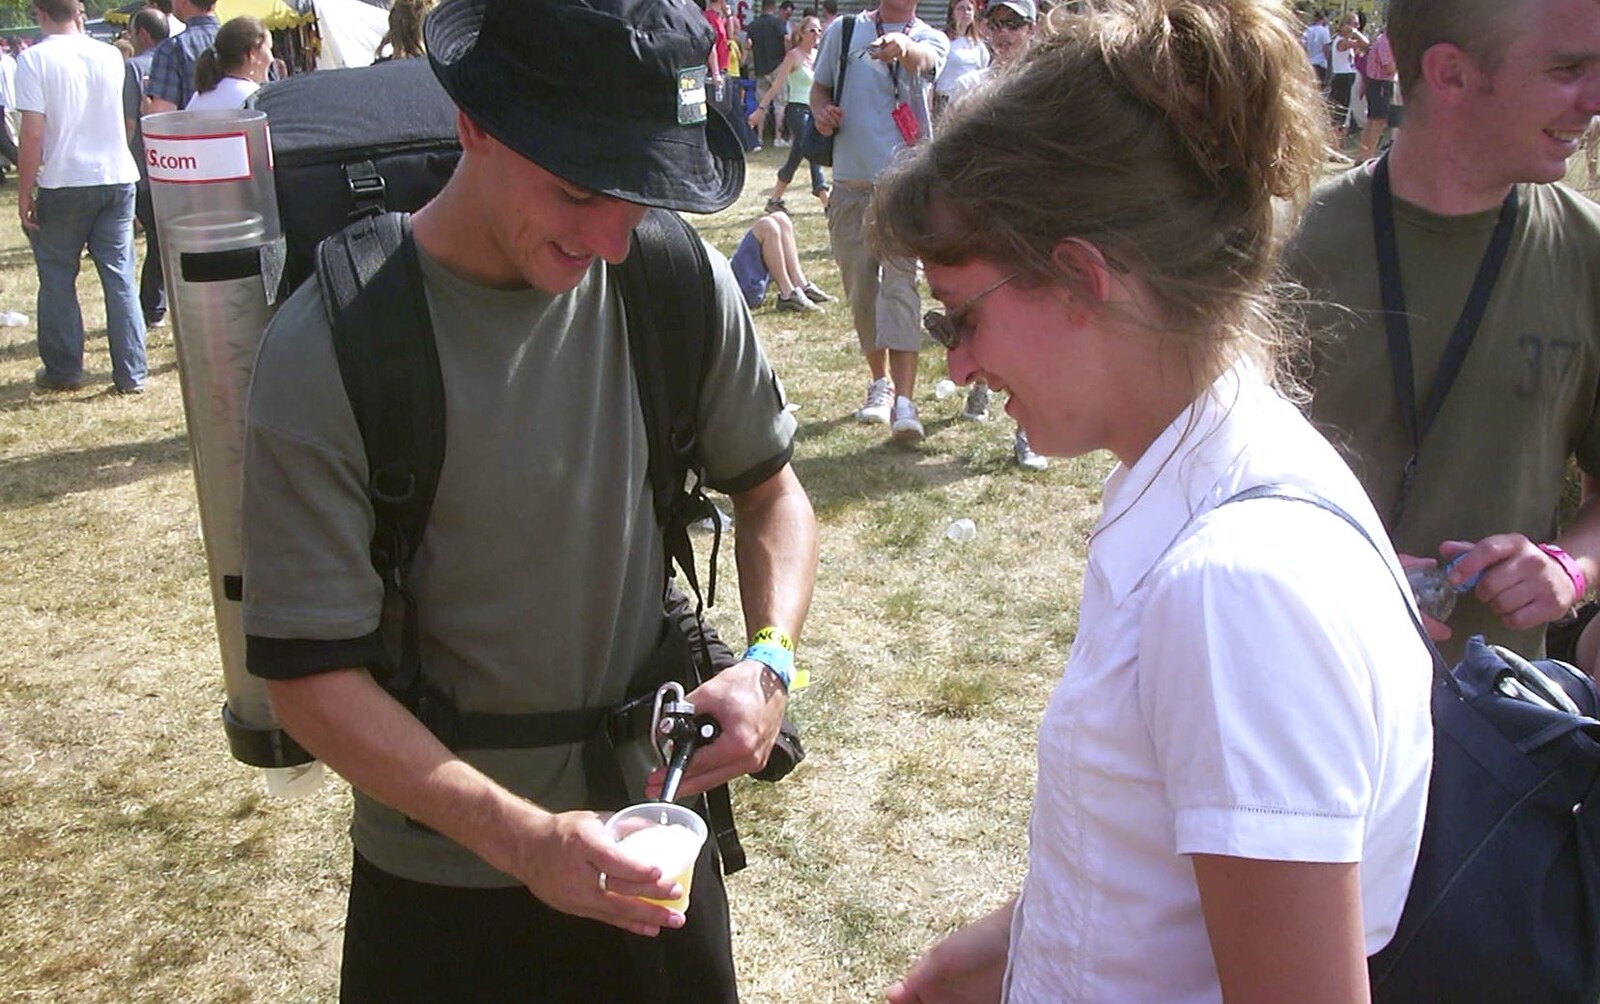 Suey scores some free cider from V Festival 2003, Hyland's Park, Chelmsford, Essex - 16th August 2003